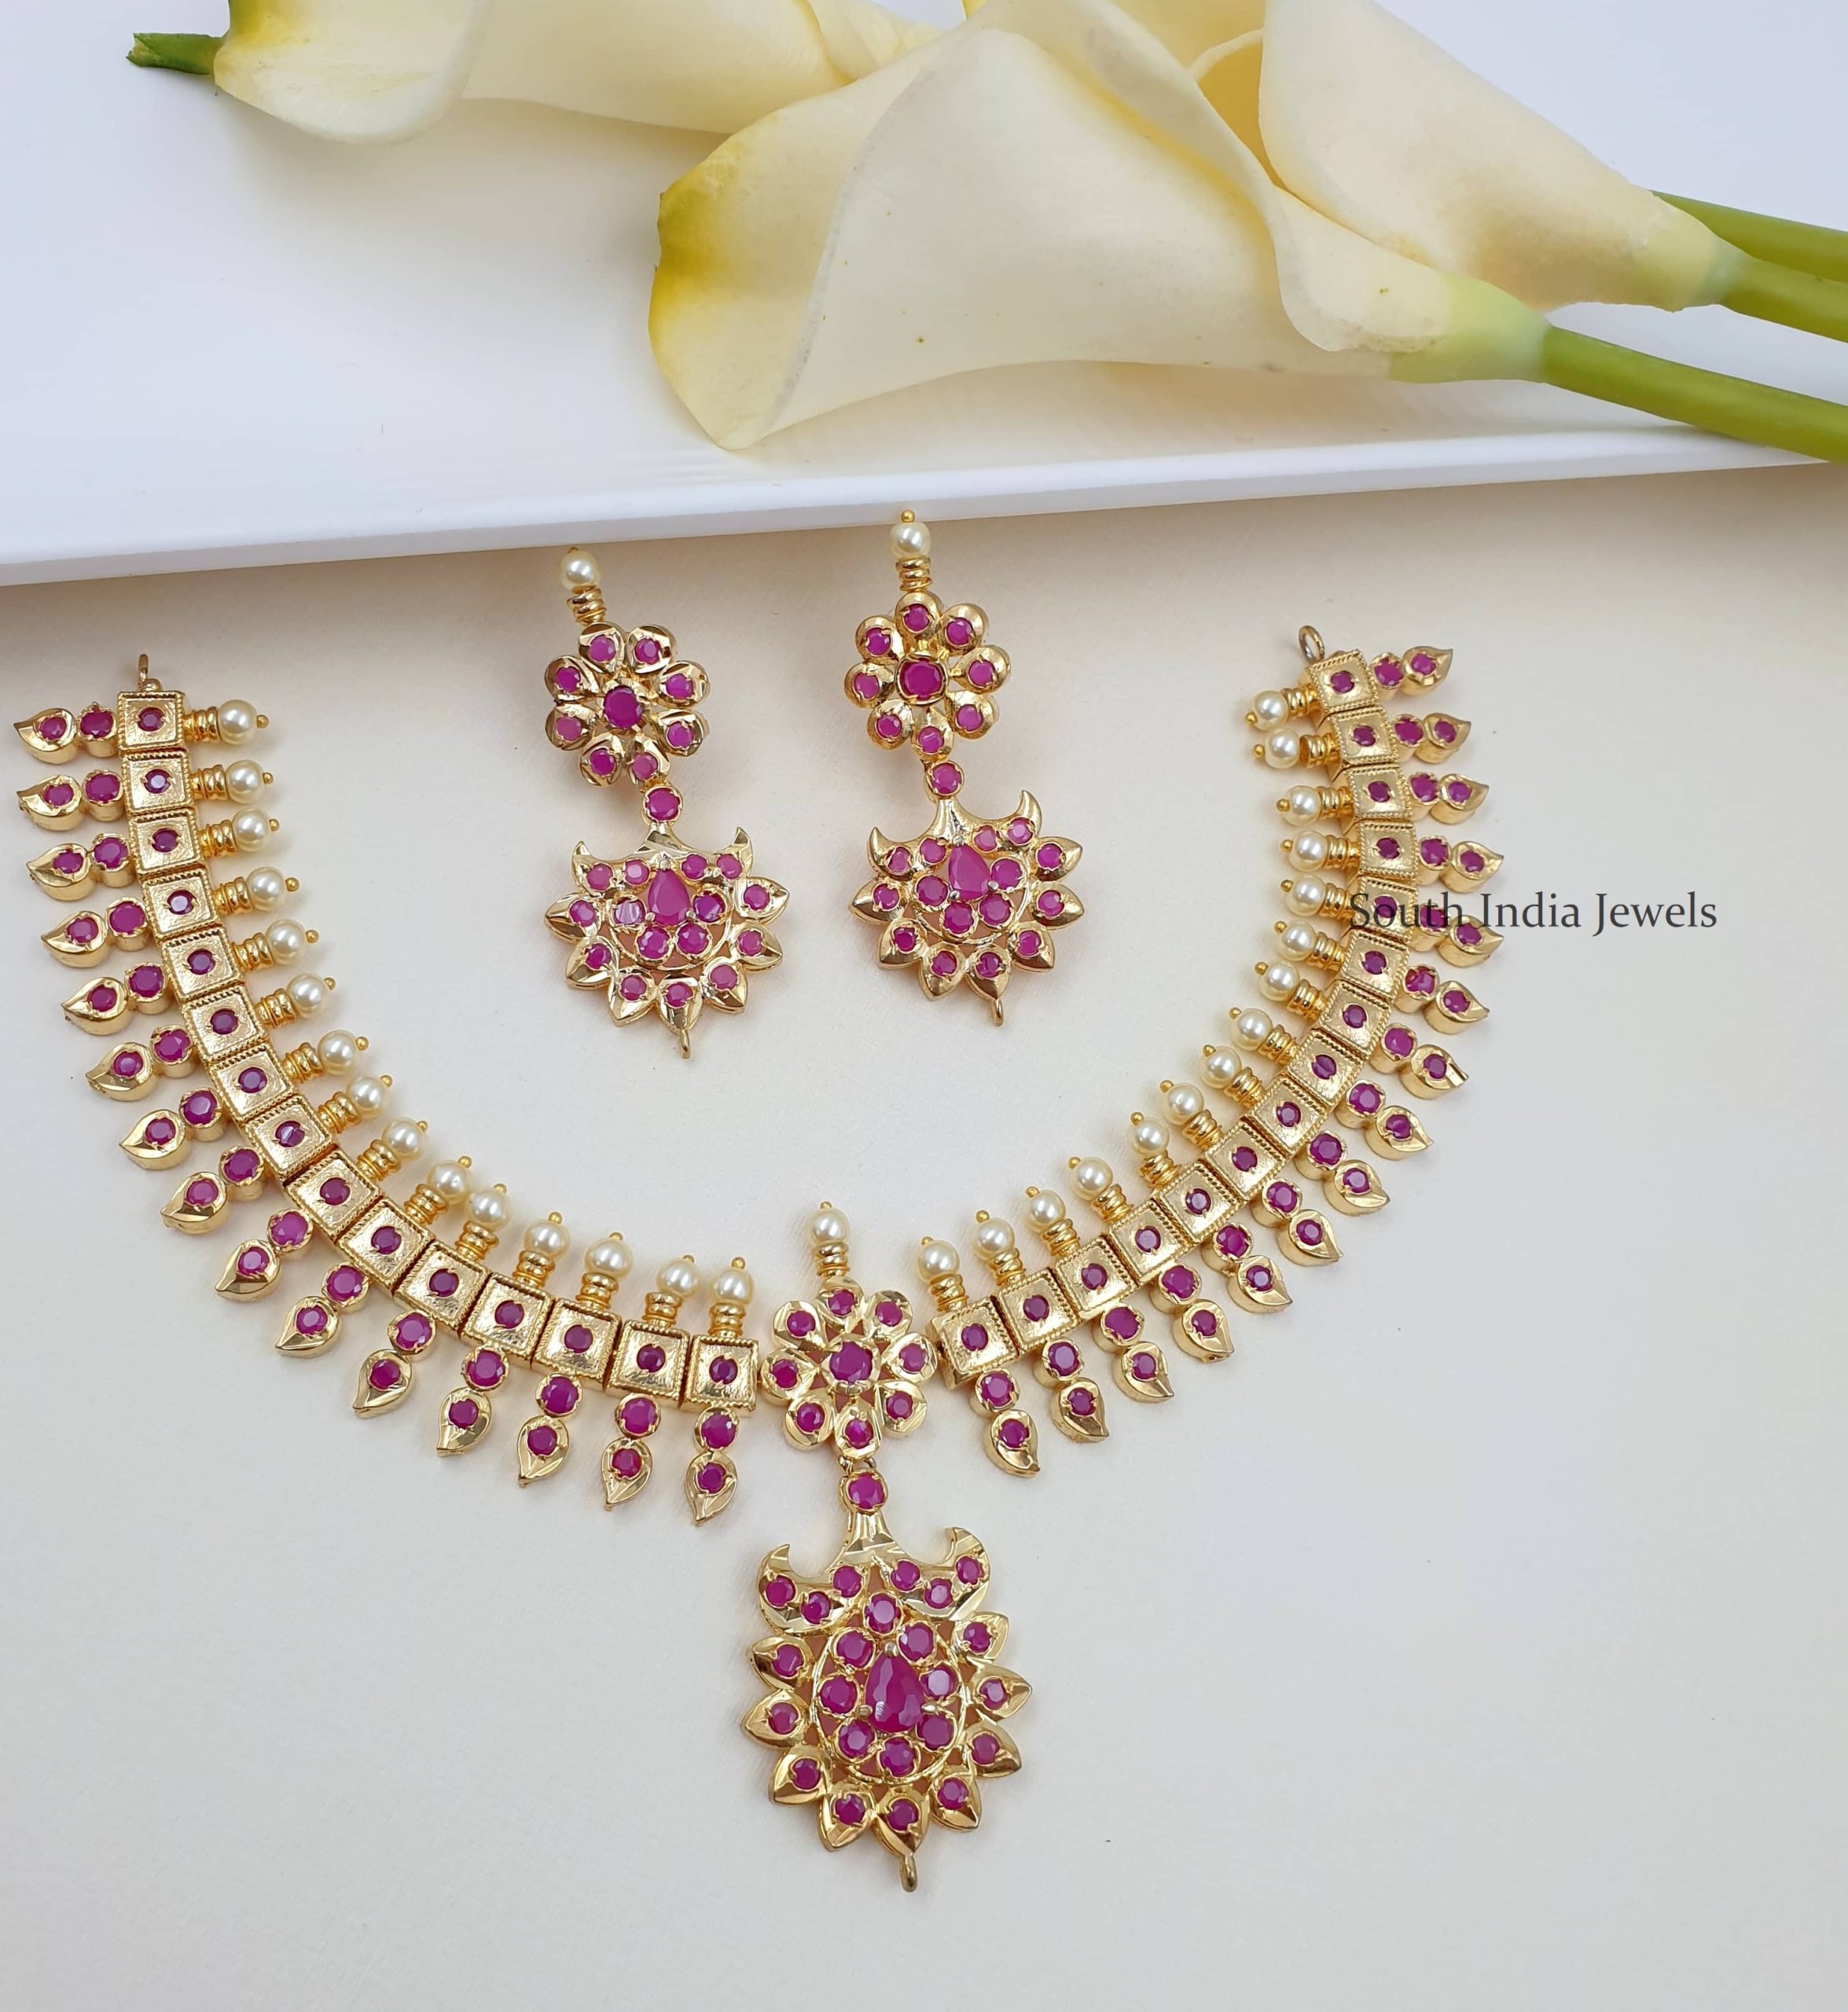 Beautiful Necklace with Dangler Earrings